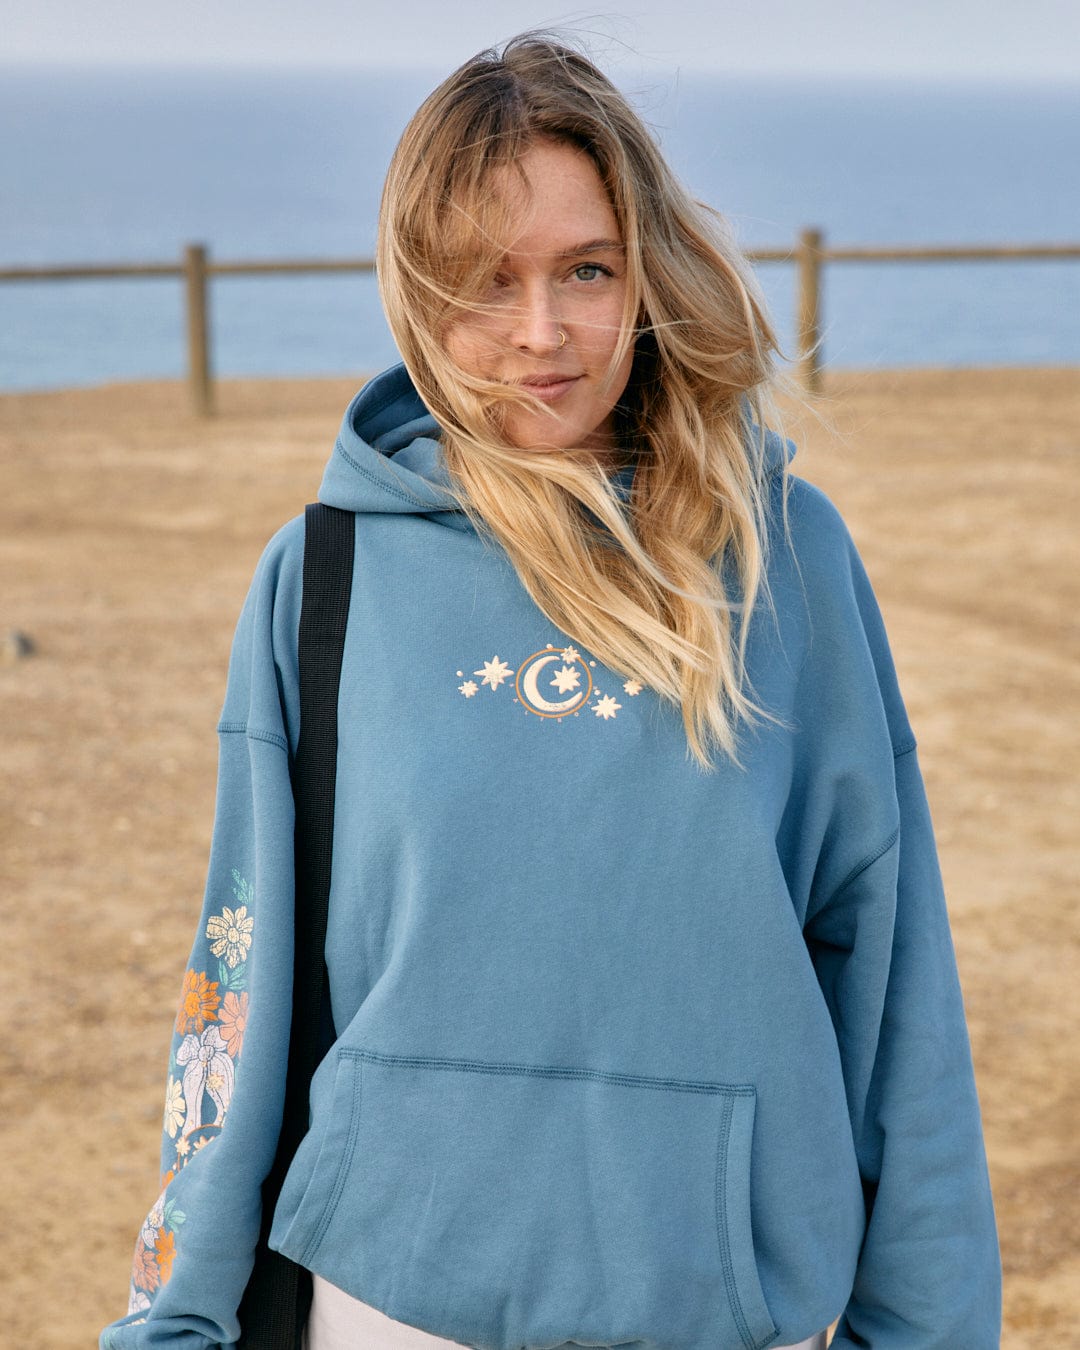 A woman wearing a Saltrock Better Days - Womens Pop Hoodie in Blue with brighter floral patterns on the sleeves stands outdoors with a sandy beach in the background.